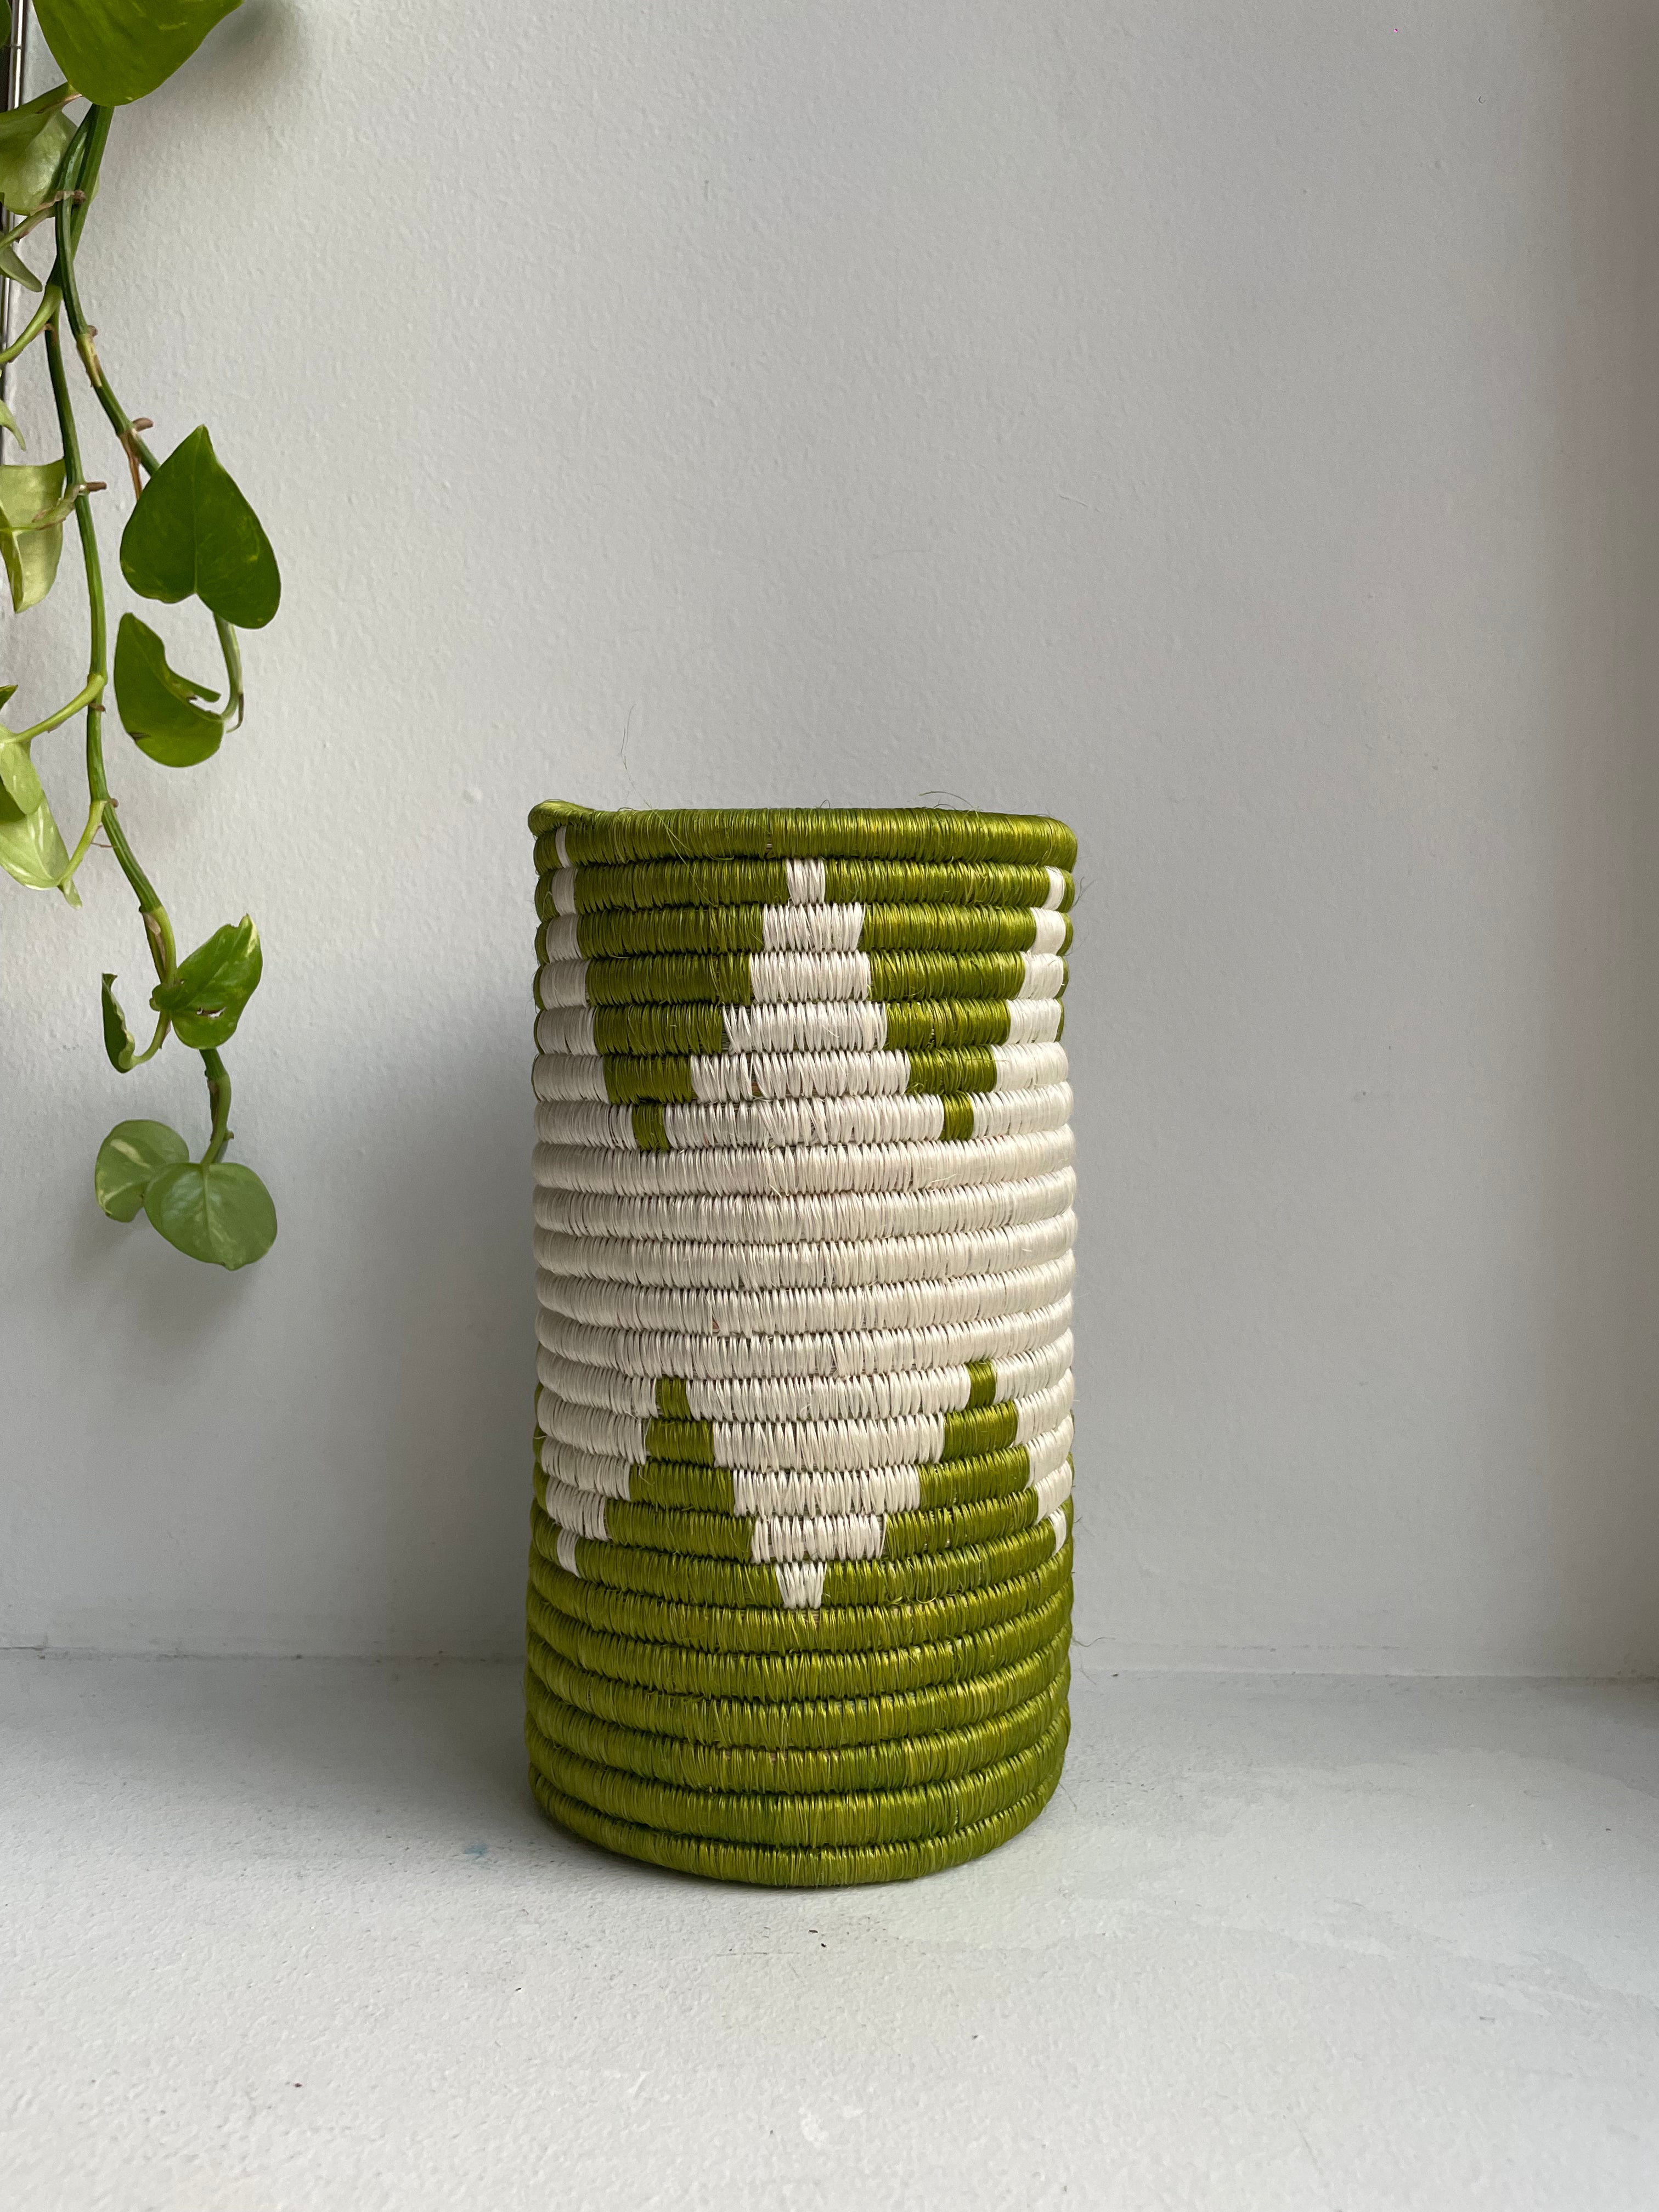 Display of grass green and white colored vase